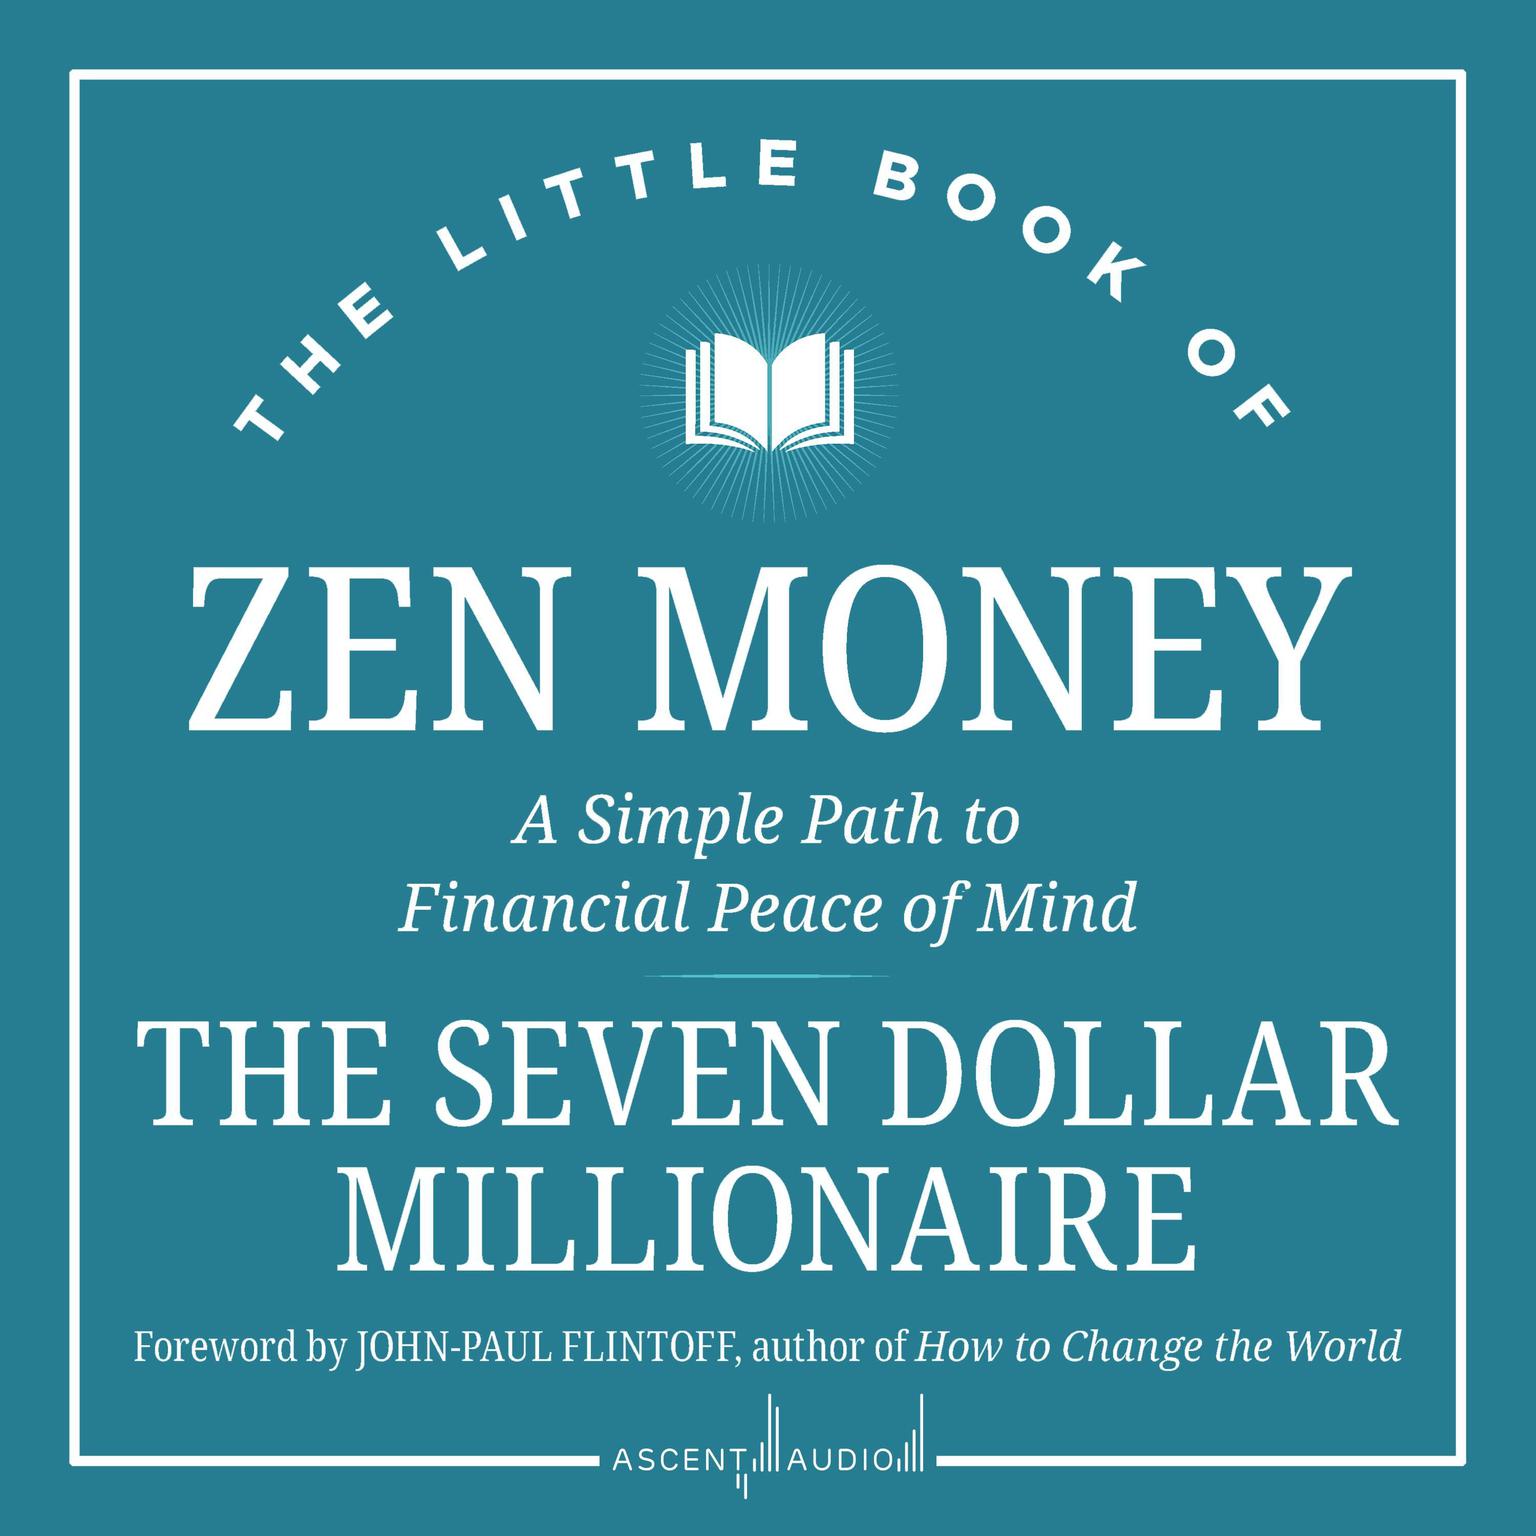 The Little Book of Zen Money: A Simple Path to Financial Peace of Mind Audiobook, by Seven Dollar Millionaire